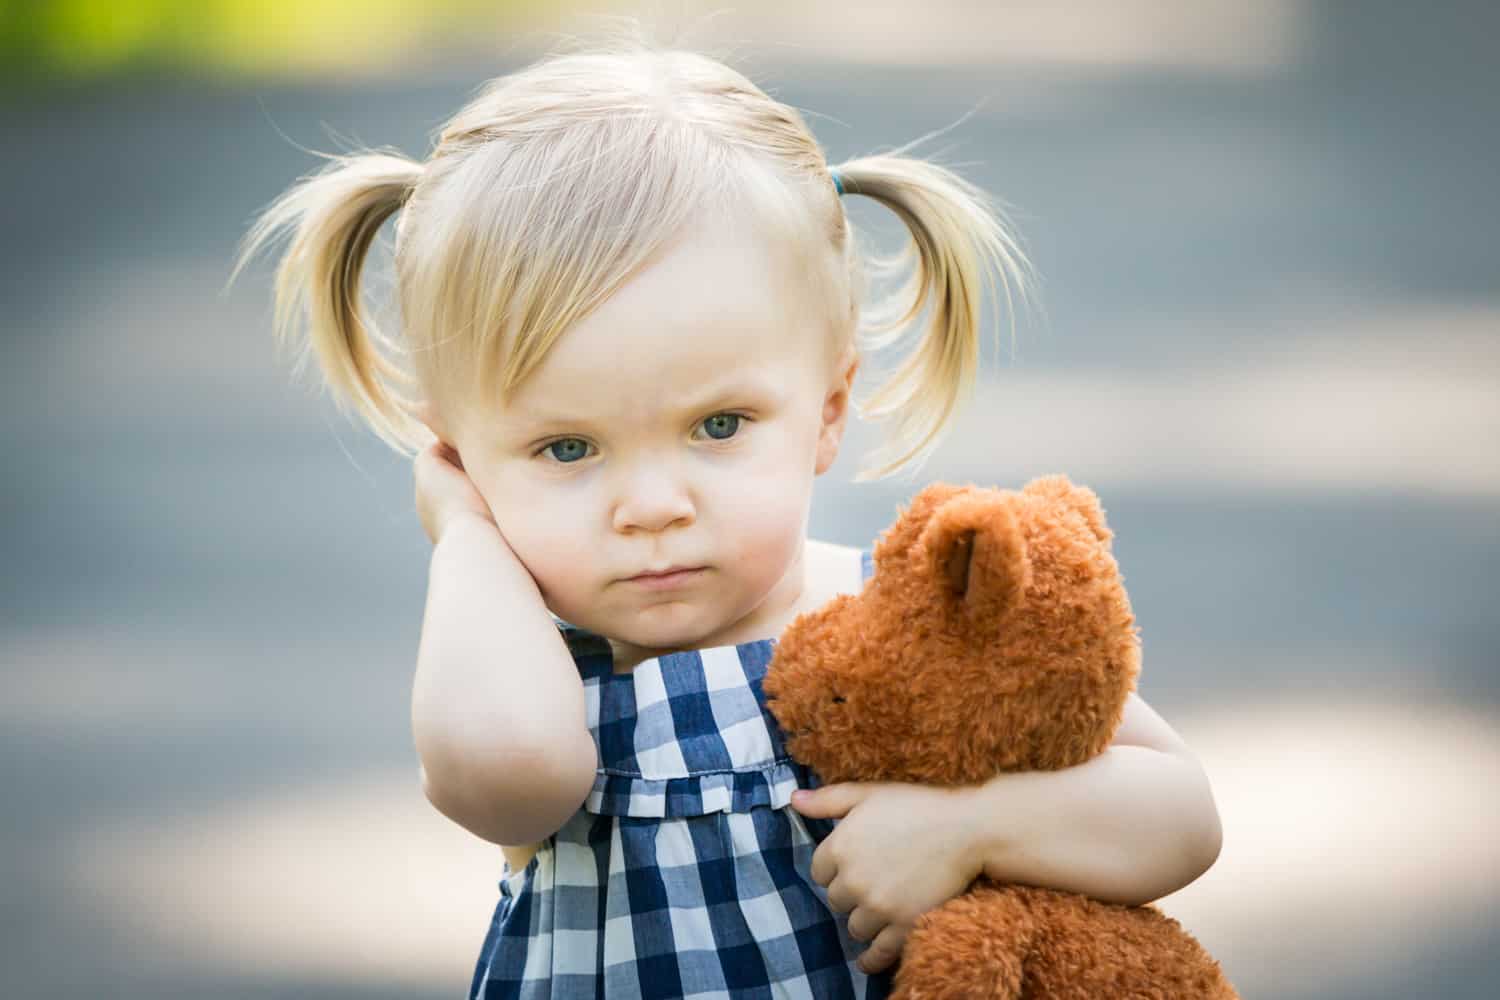 Little blond girl with pigtails holding stuffed animal